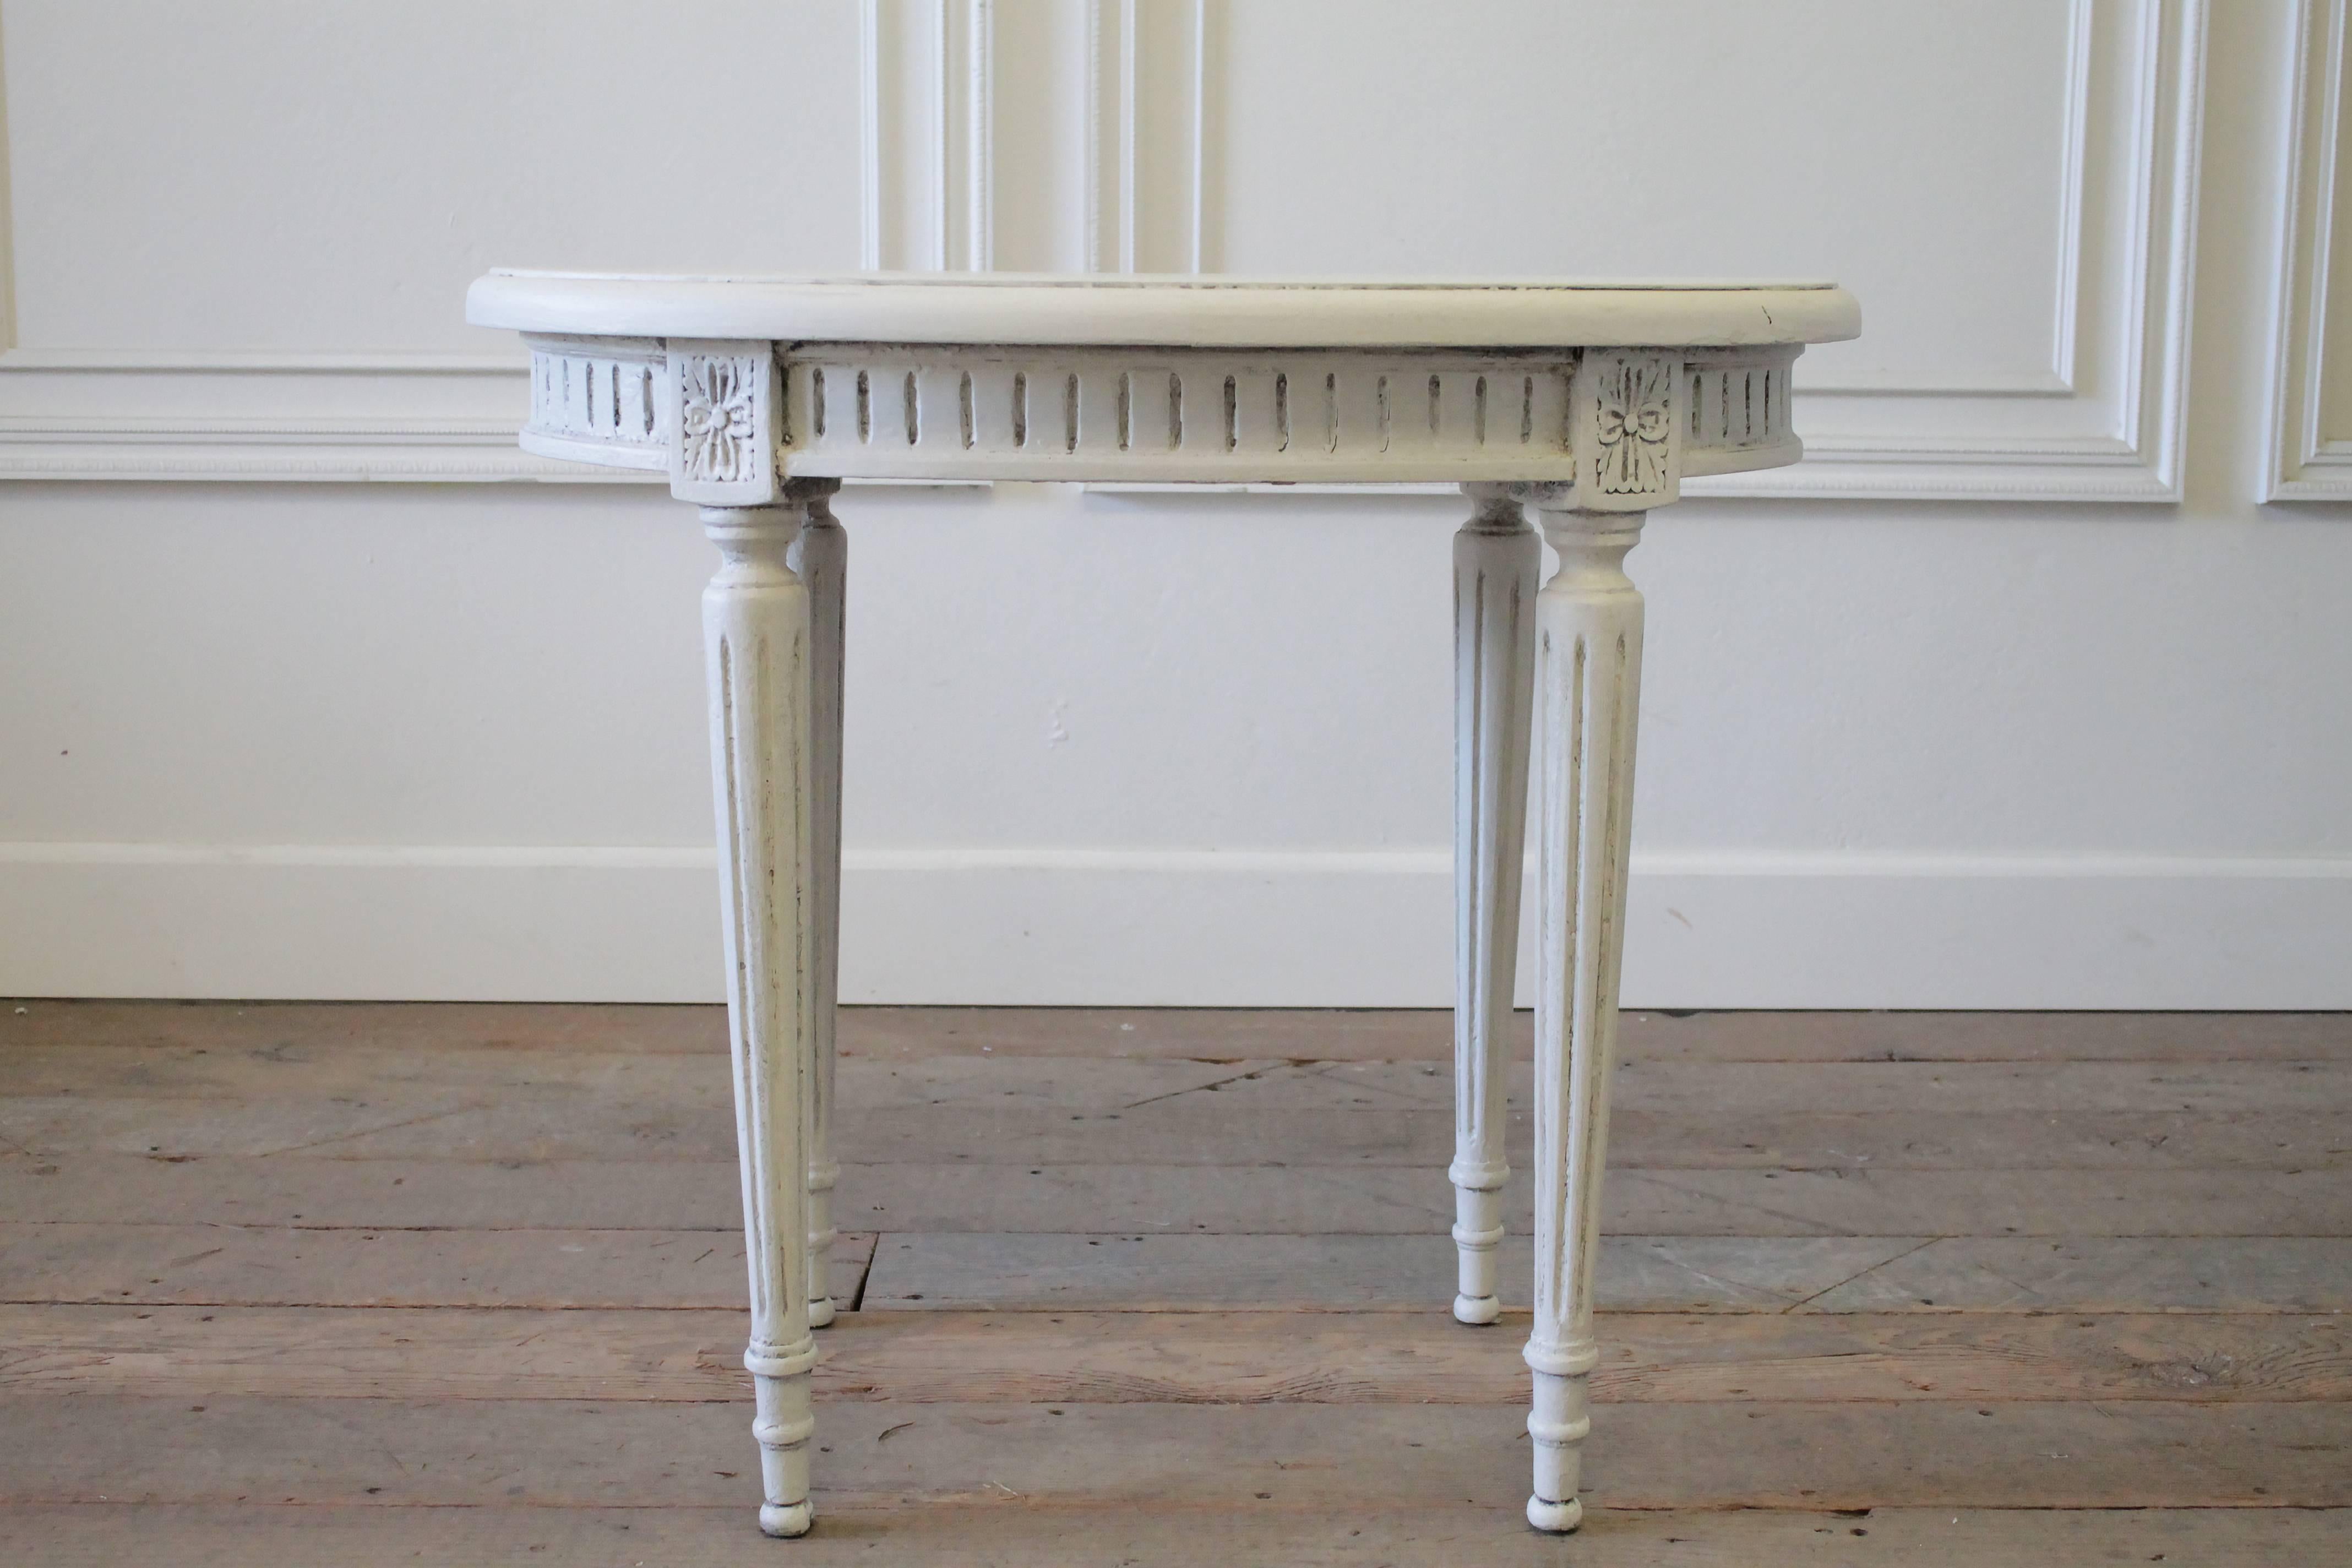 20th century carved and painted Louis XVI style oval side table
Painted in a soft off-white, with subtle distressed edges, and finished with an antique glazed patina.
Legs are very solid and sturdy, ready for daily use.
Measures: 28.5